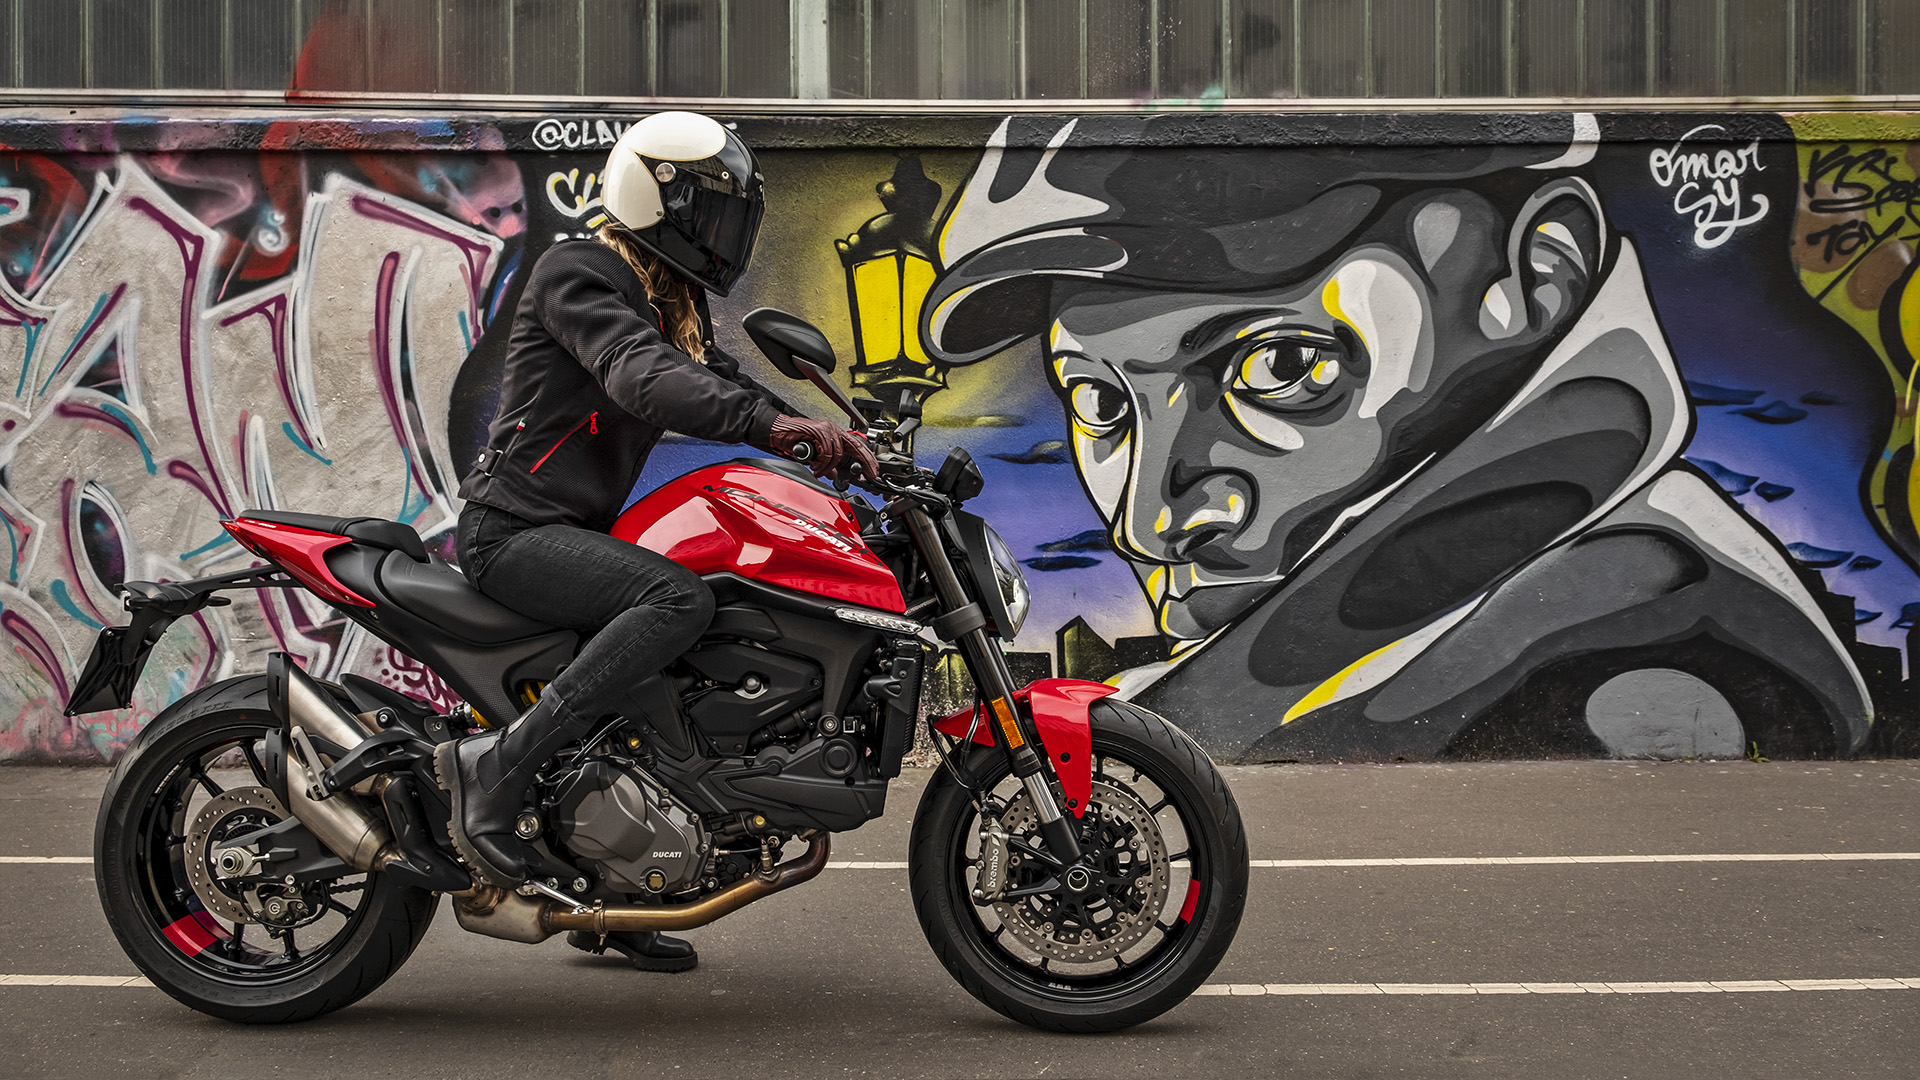 Ducati_Monster_overview_02_gallery_1920x1080